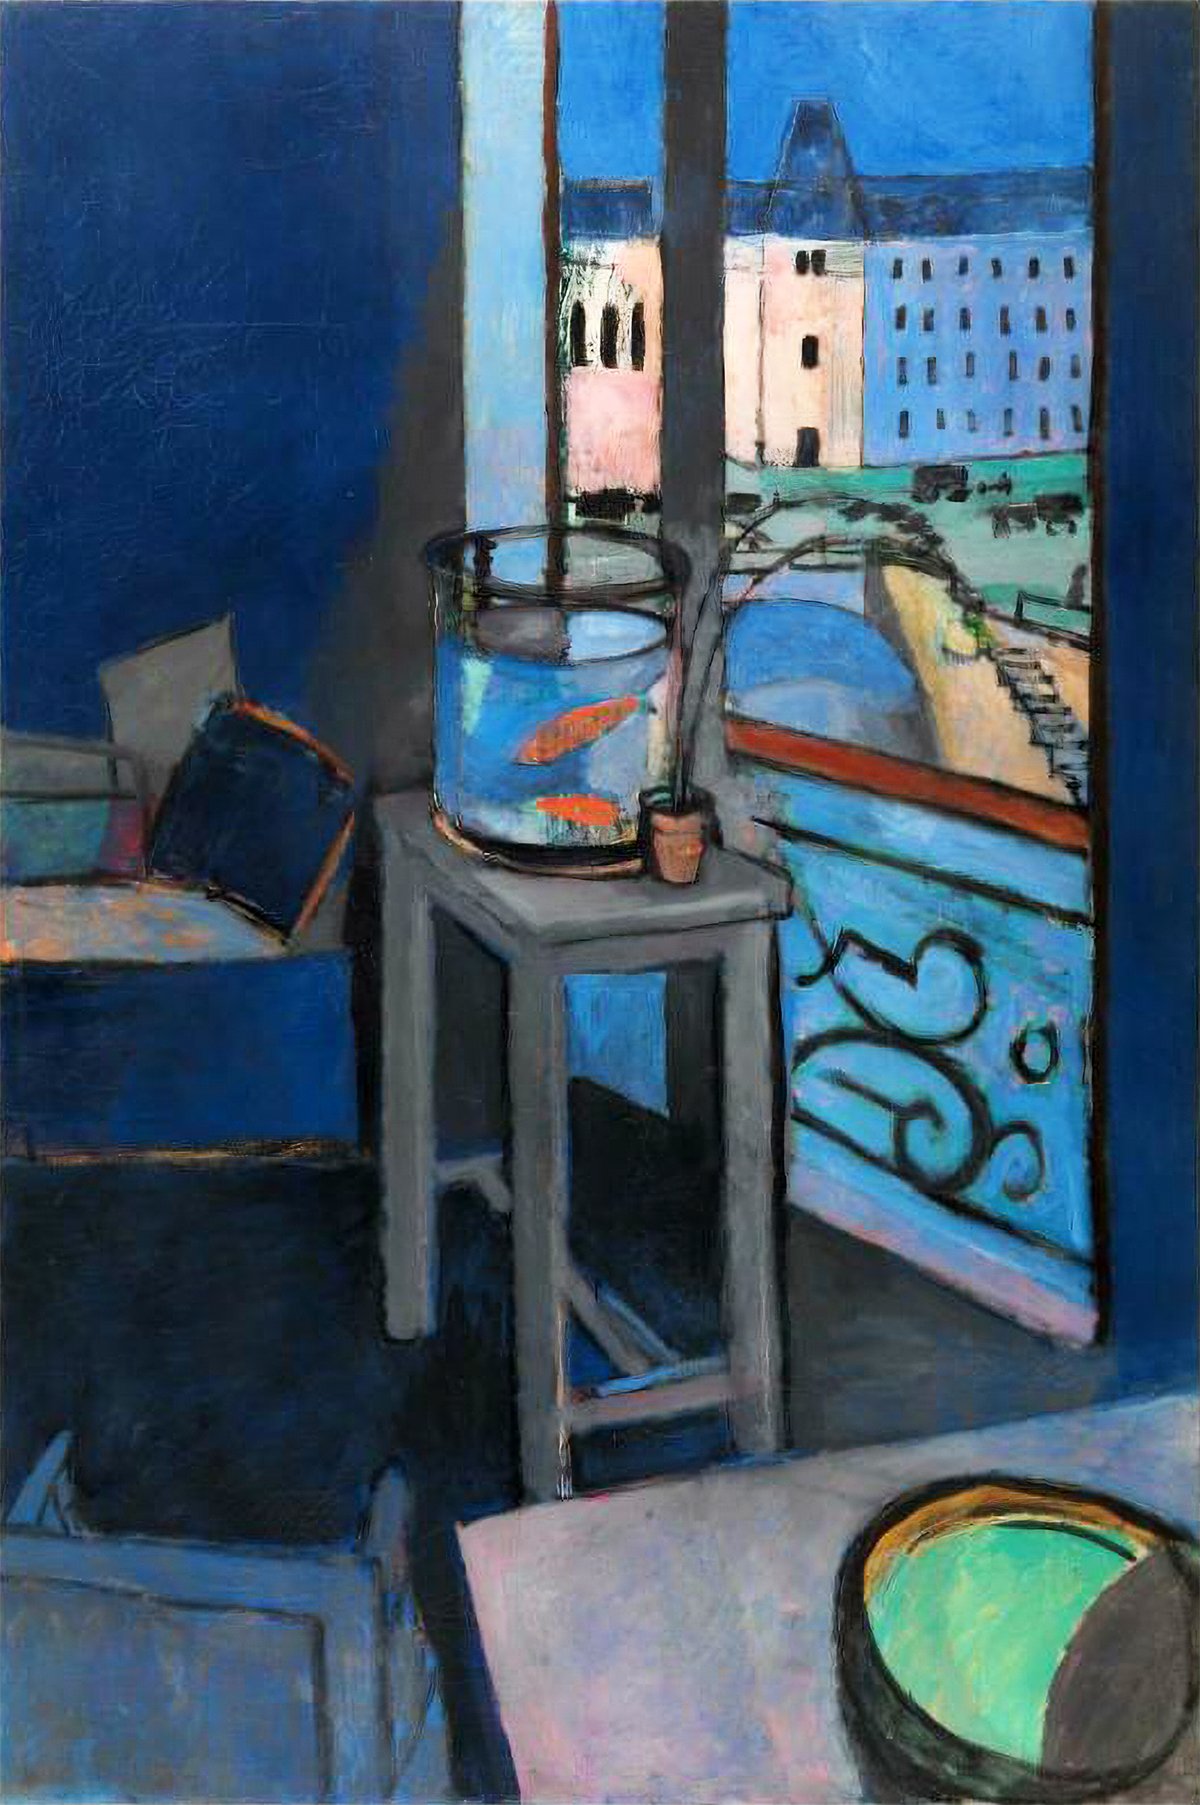 This image is Henri Matisse's painting "Interior with a Goldfish Bowl" from 1914. It depicts a room bathed in shades of blue and grey, featuring a clear goldfish bowl on a table in the foreground. Inside the bowl, vibrant orange-red goldfish contrast sharply with the muted tones of the interior. The room opens onto a view of the Seine and the Île de la Cité through a large window, with the outdoor scene rendered in warm sunlight. The curved lines of the bowl echo the arches of the Pont Saint-Michel bridge outside, integrating the interior with the exterior.